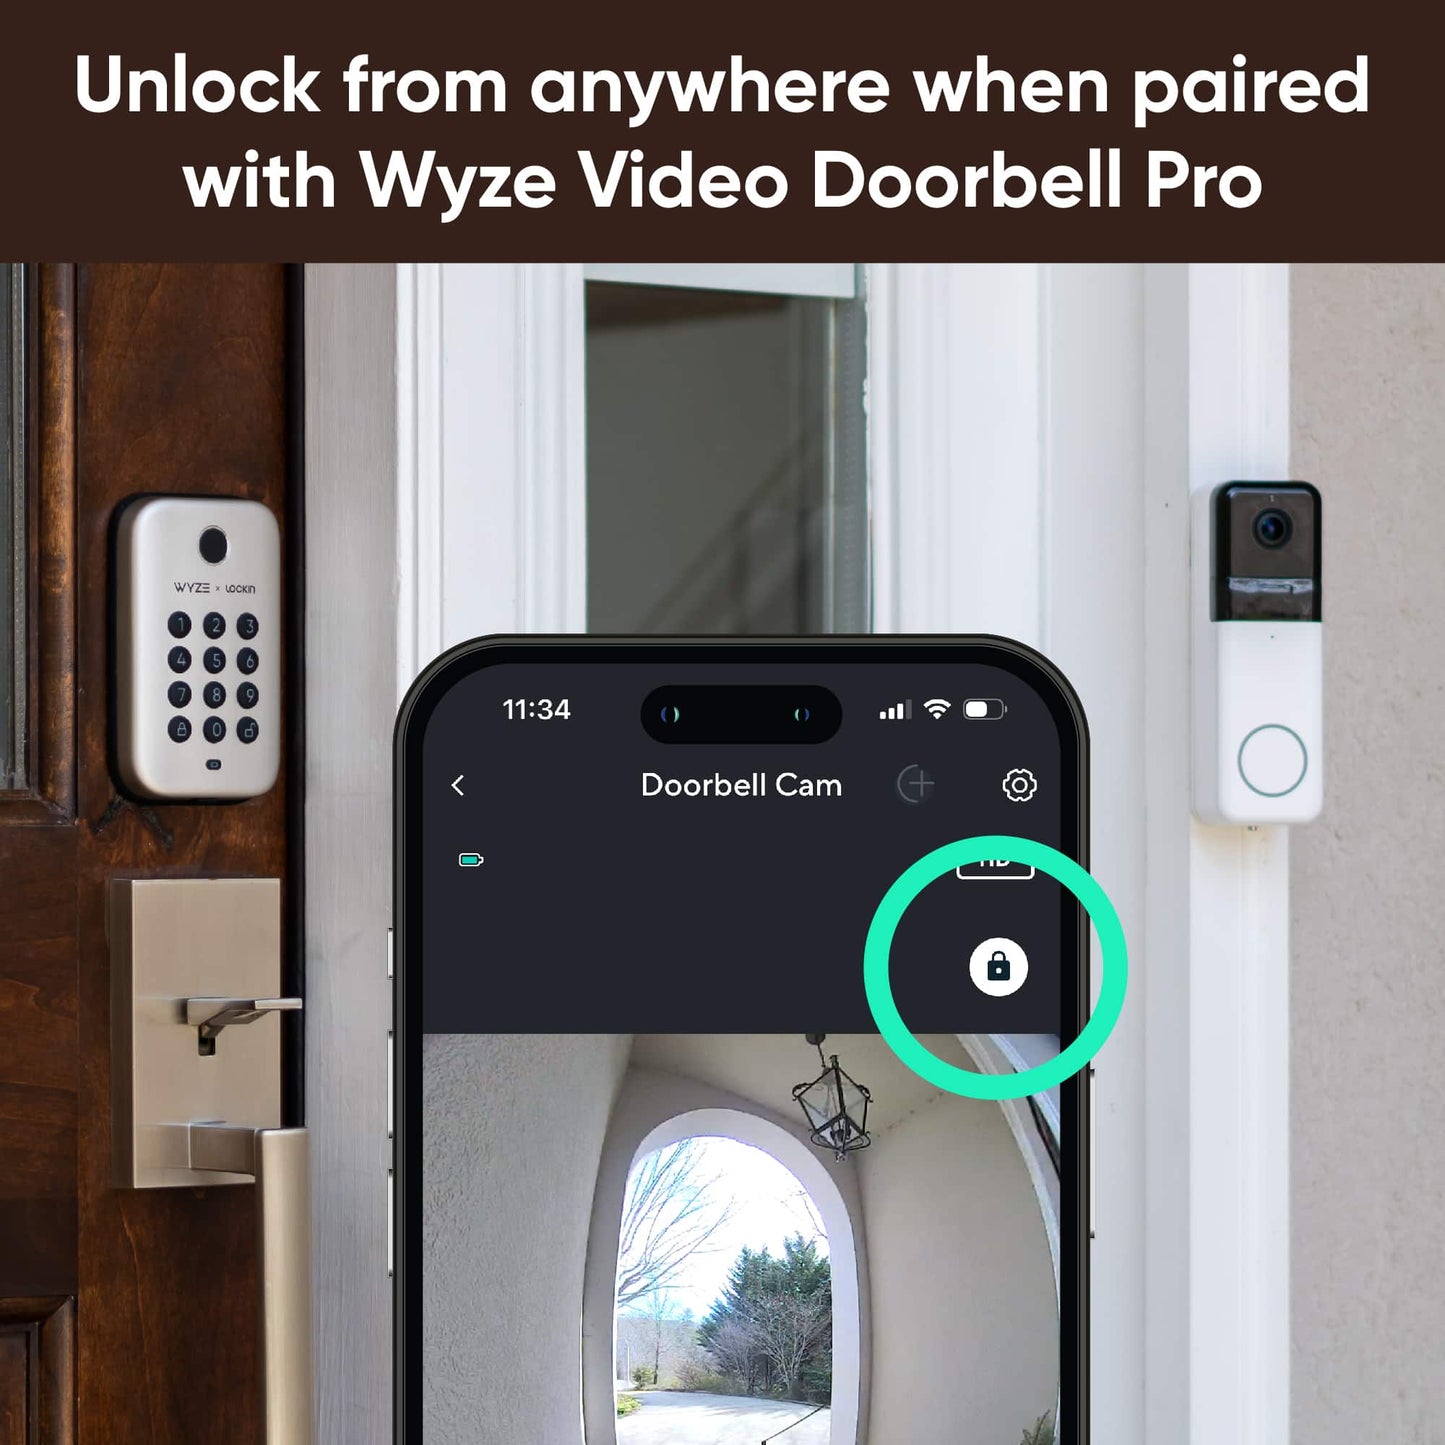 Phone with app open showing locked status and the Wyze Lock Bolt and Video Doorbell Pro in the background.